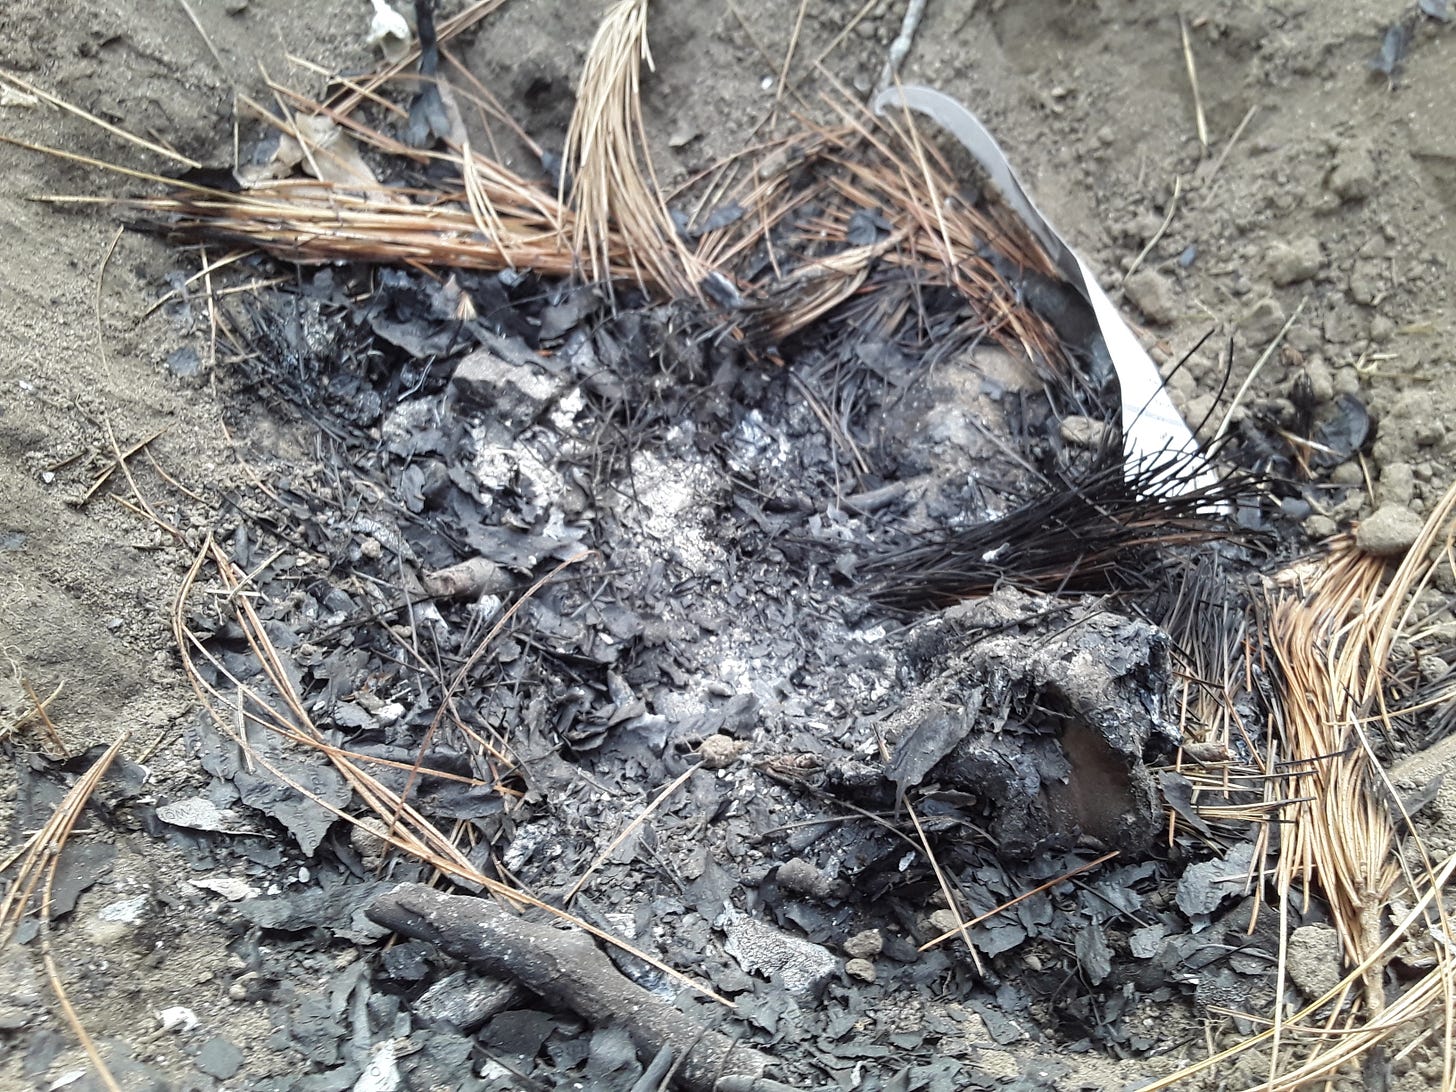 Photograph of the bottom of one fire pit after the rocks were removed, showing burned ashes.